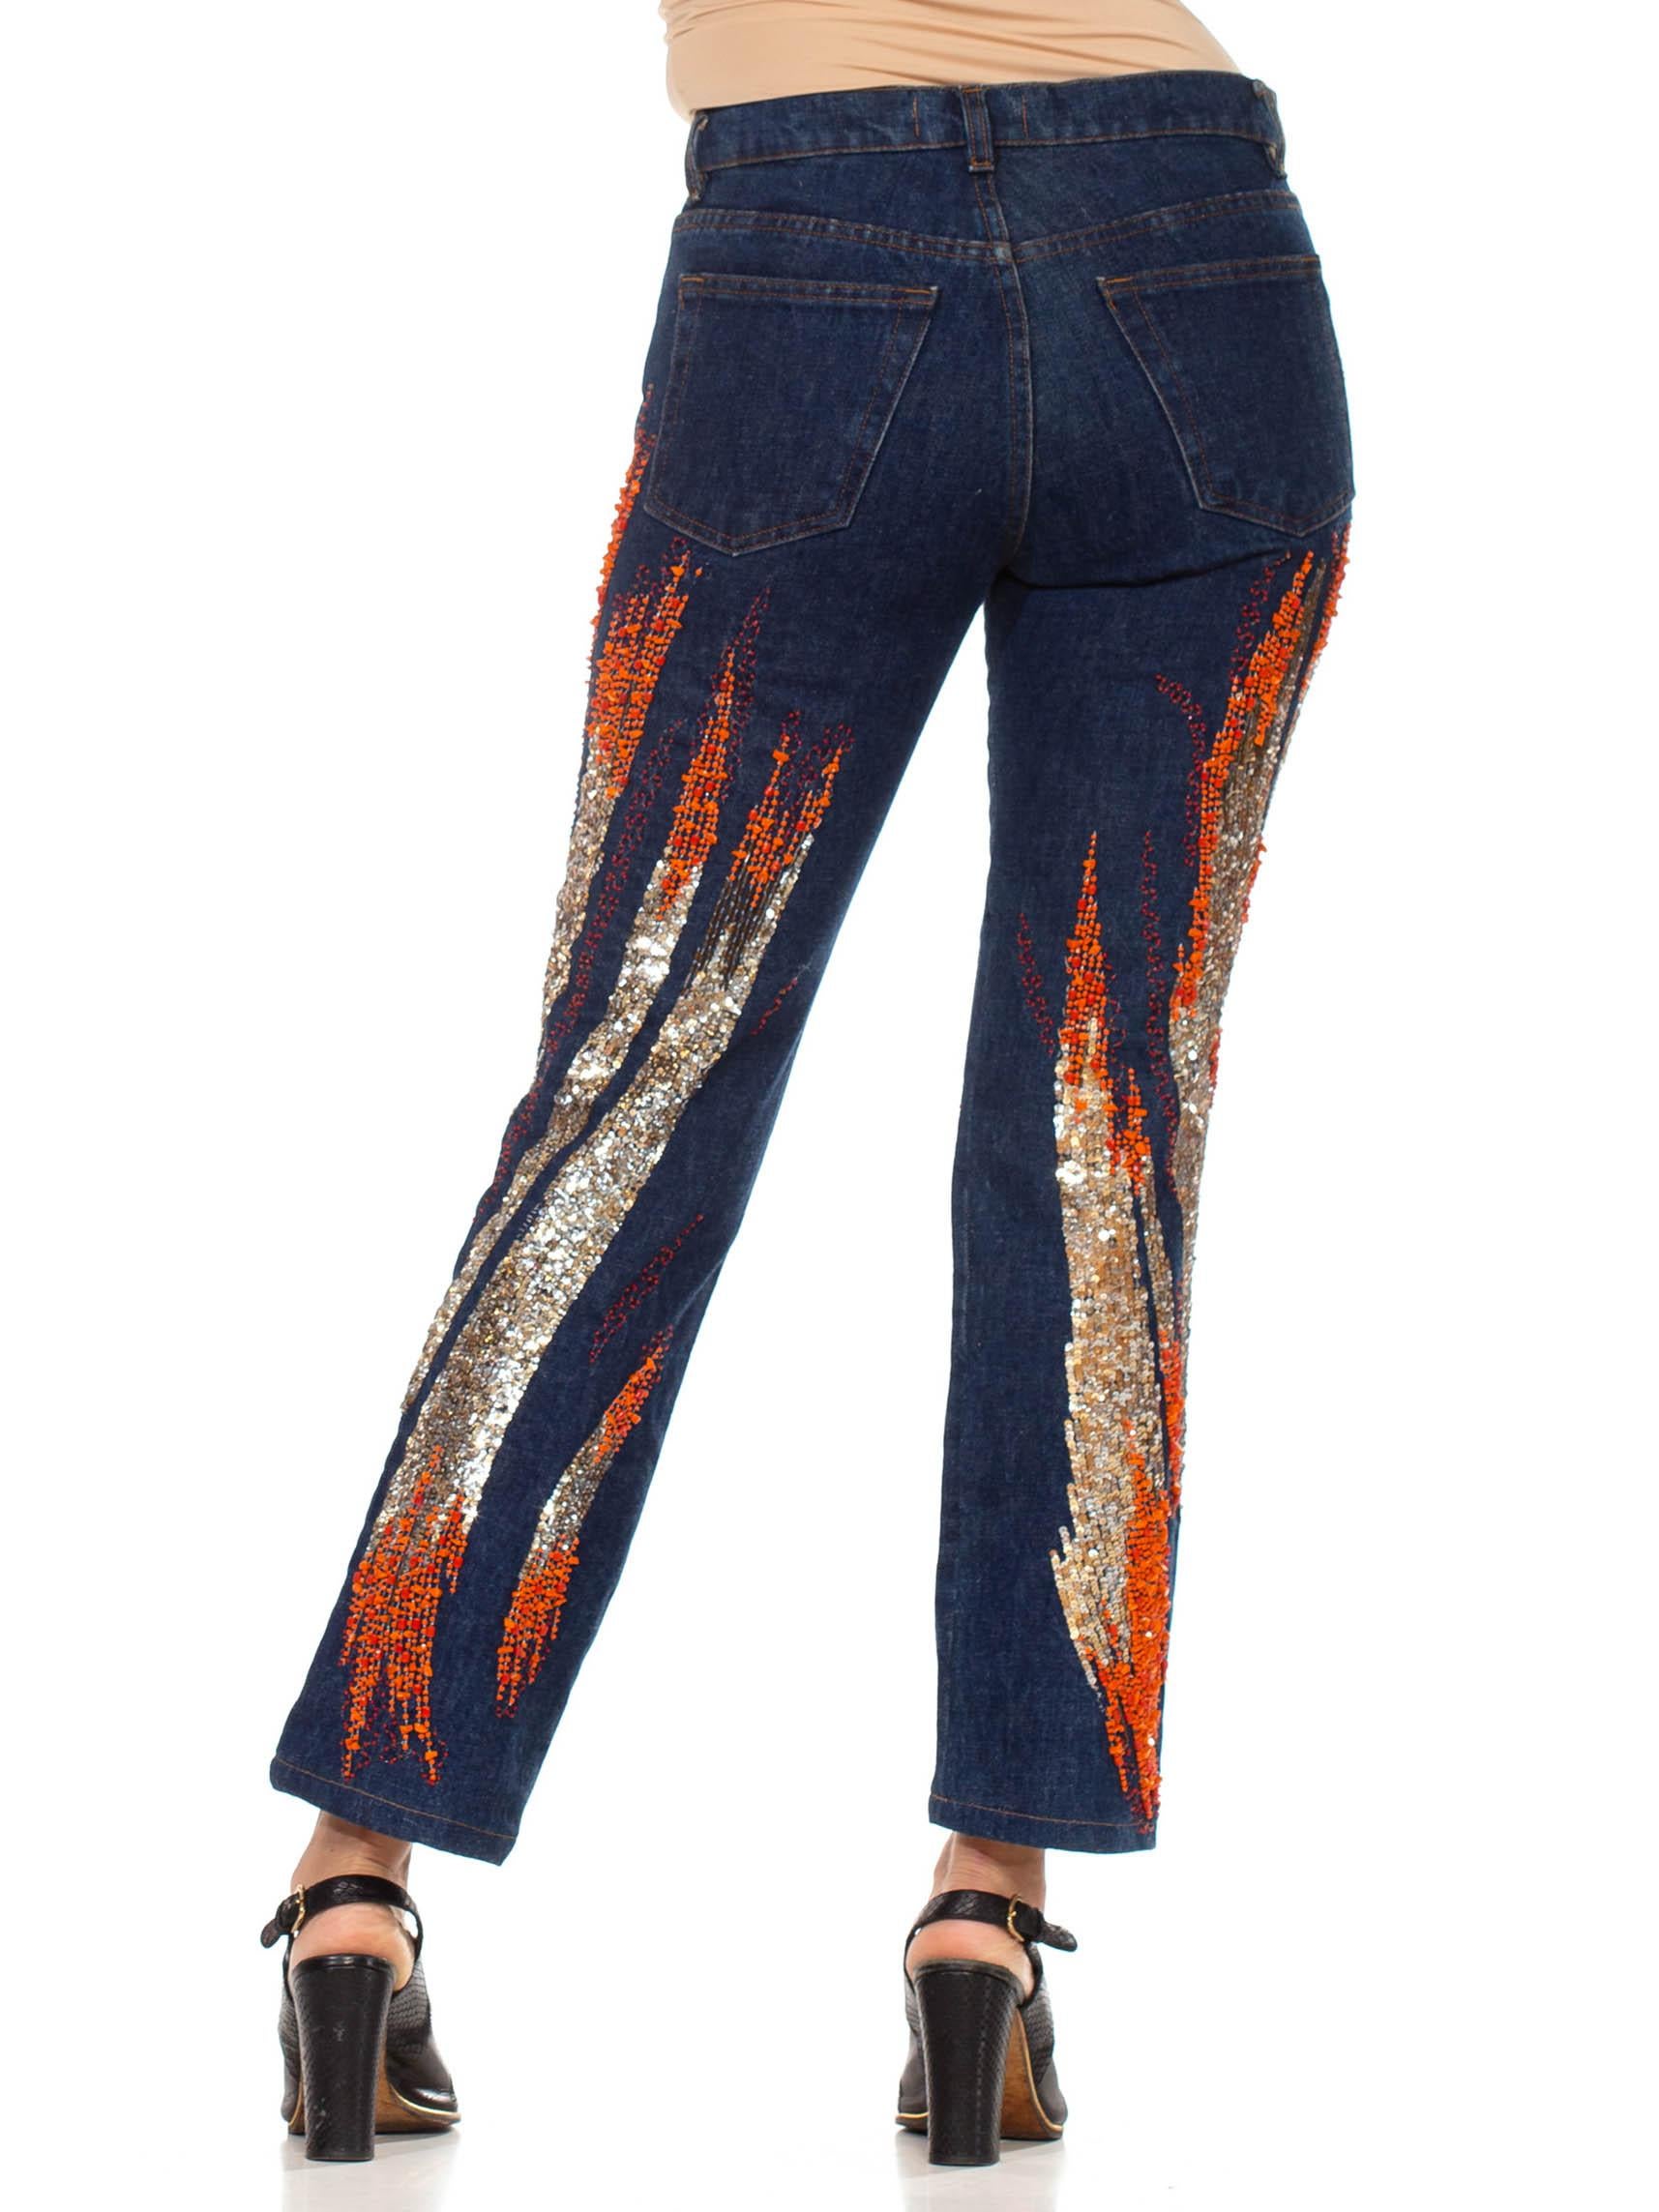 2000S ROBERTO CAVALLI Blue Cotton Denim Jeans With Orange And Gold Beaded Firew In Excellent Condition For Sale In New York, NY